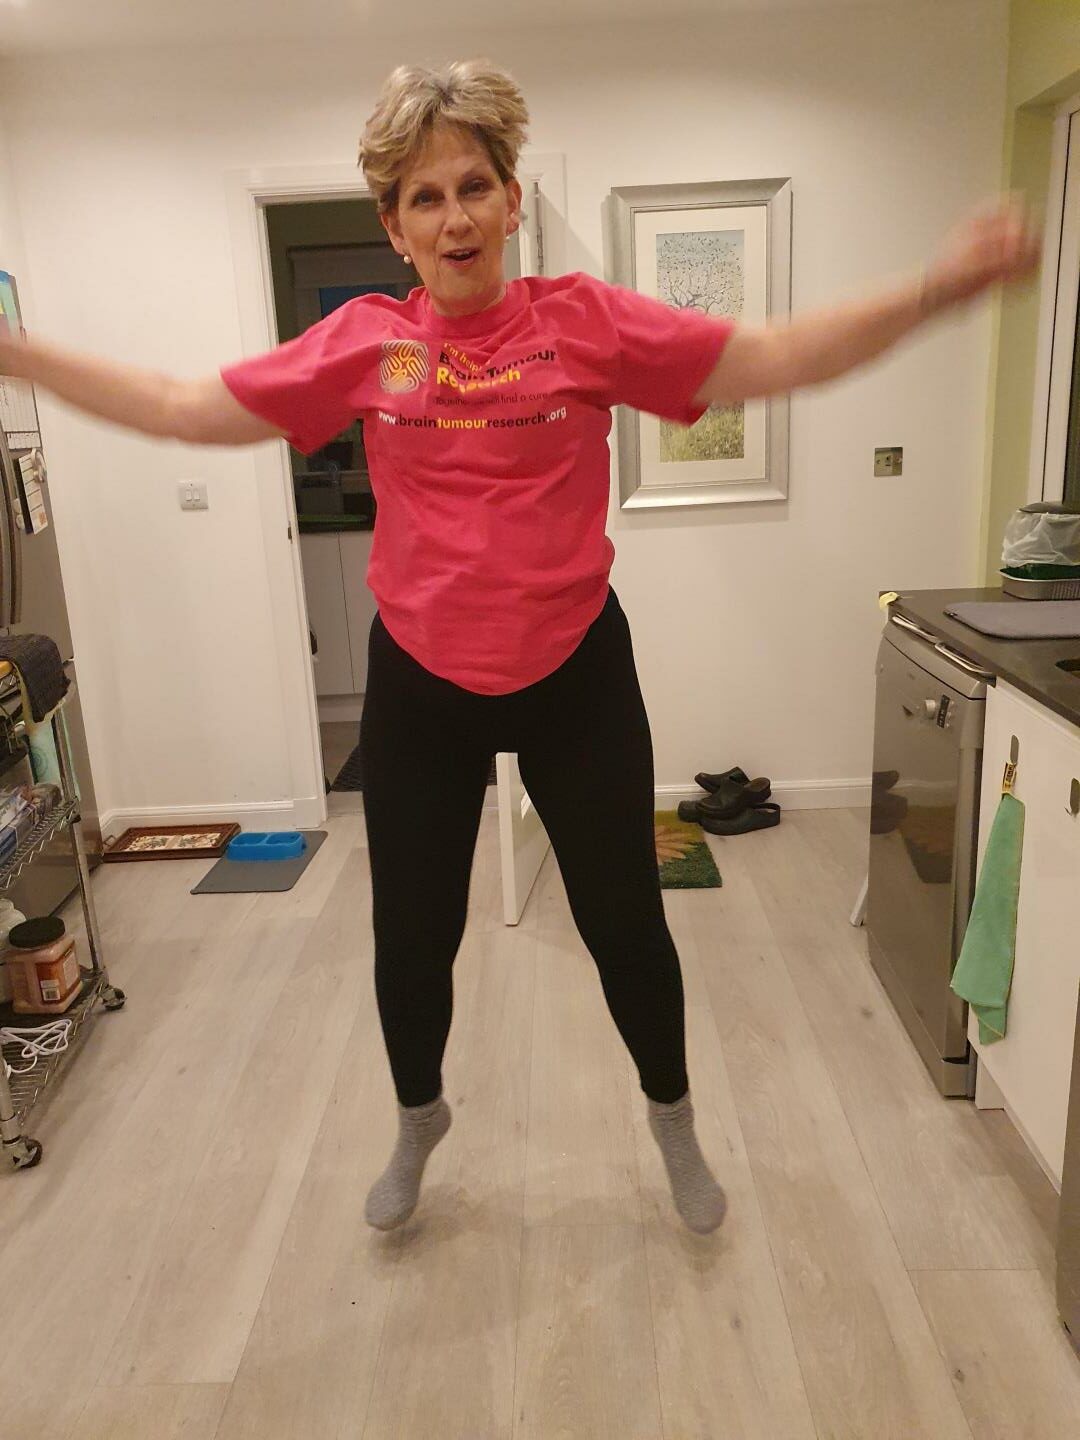 Deirdre, who was diagnosed with a brain tumour in 2008, practicing her star jumps.